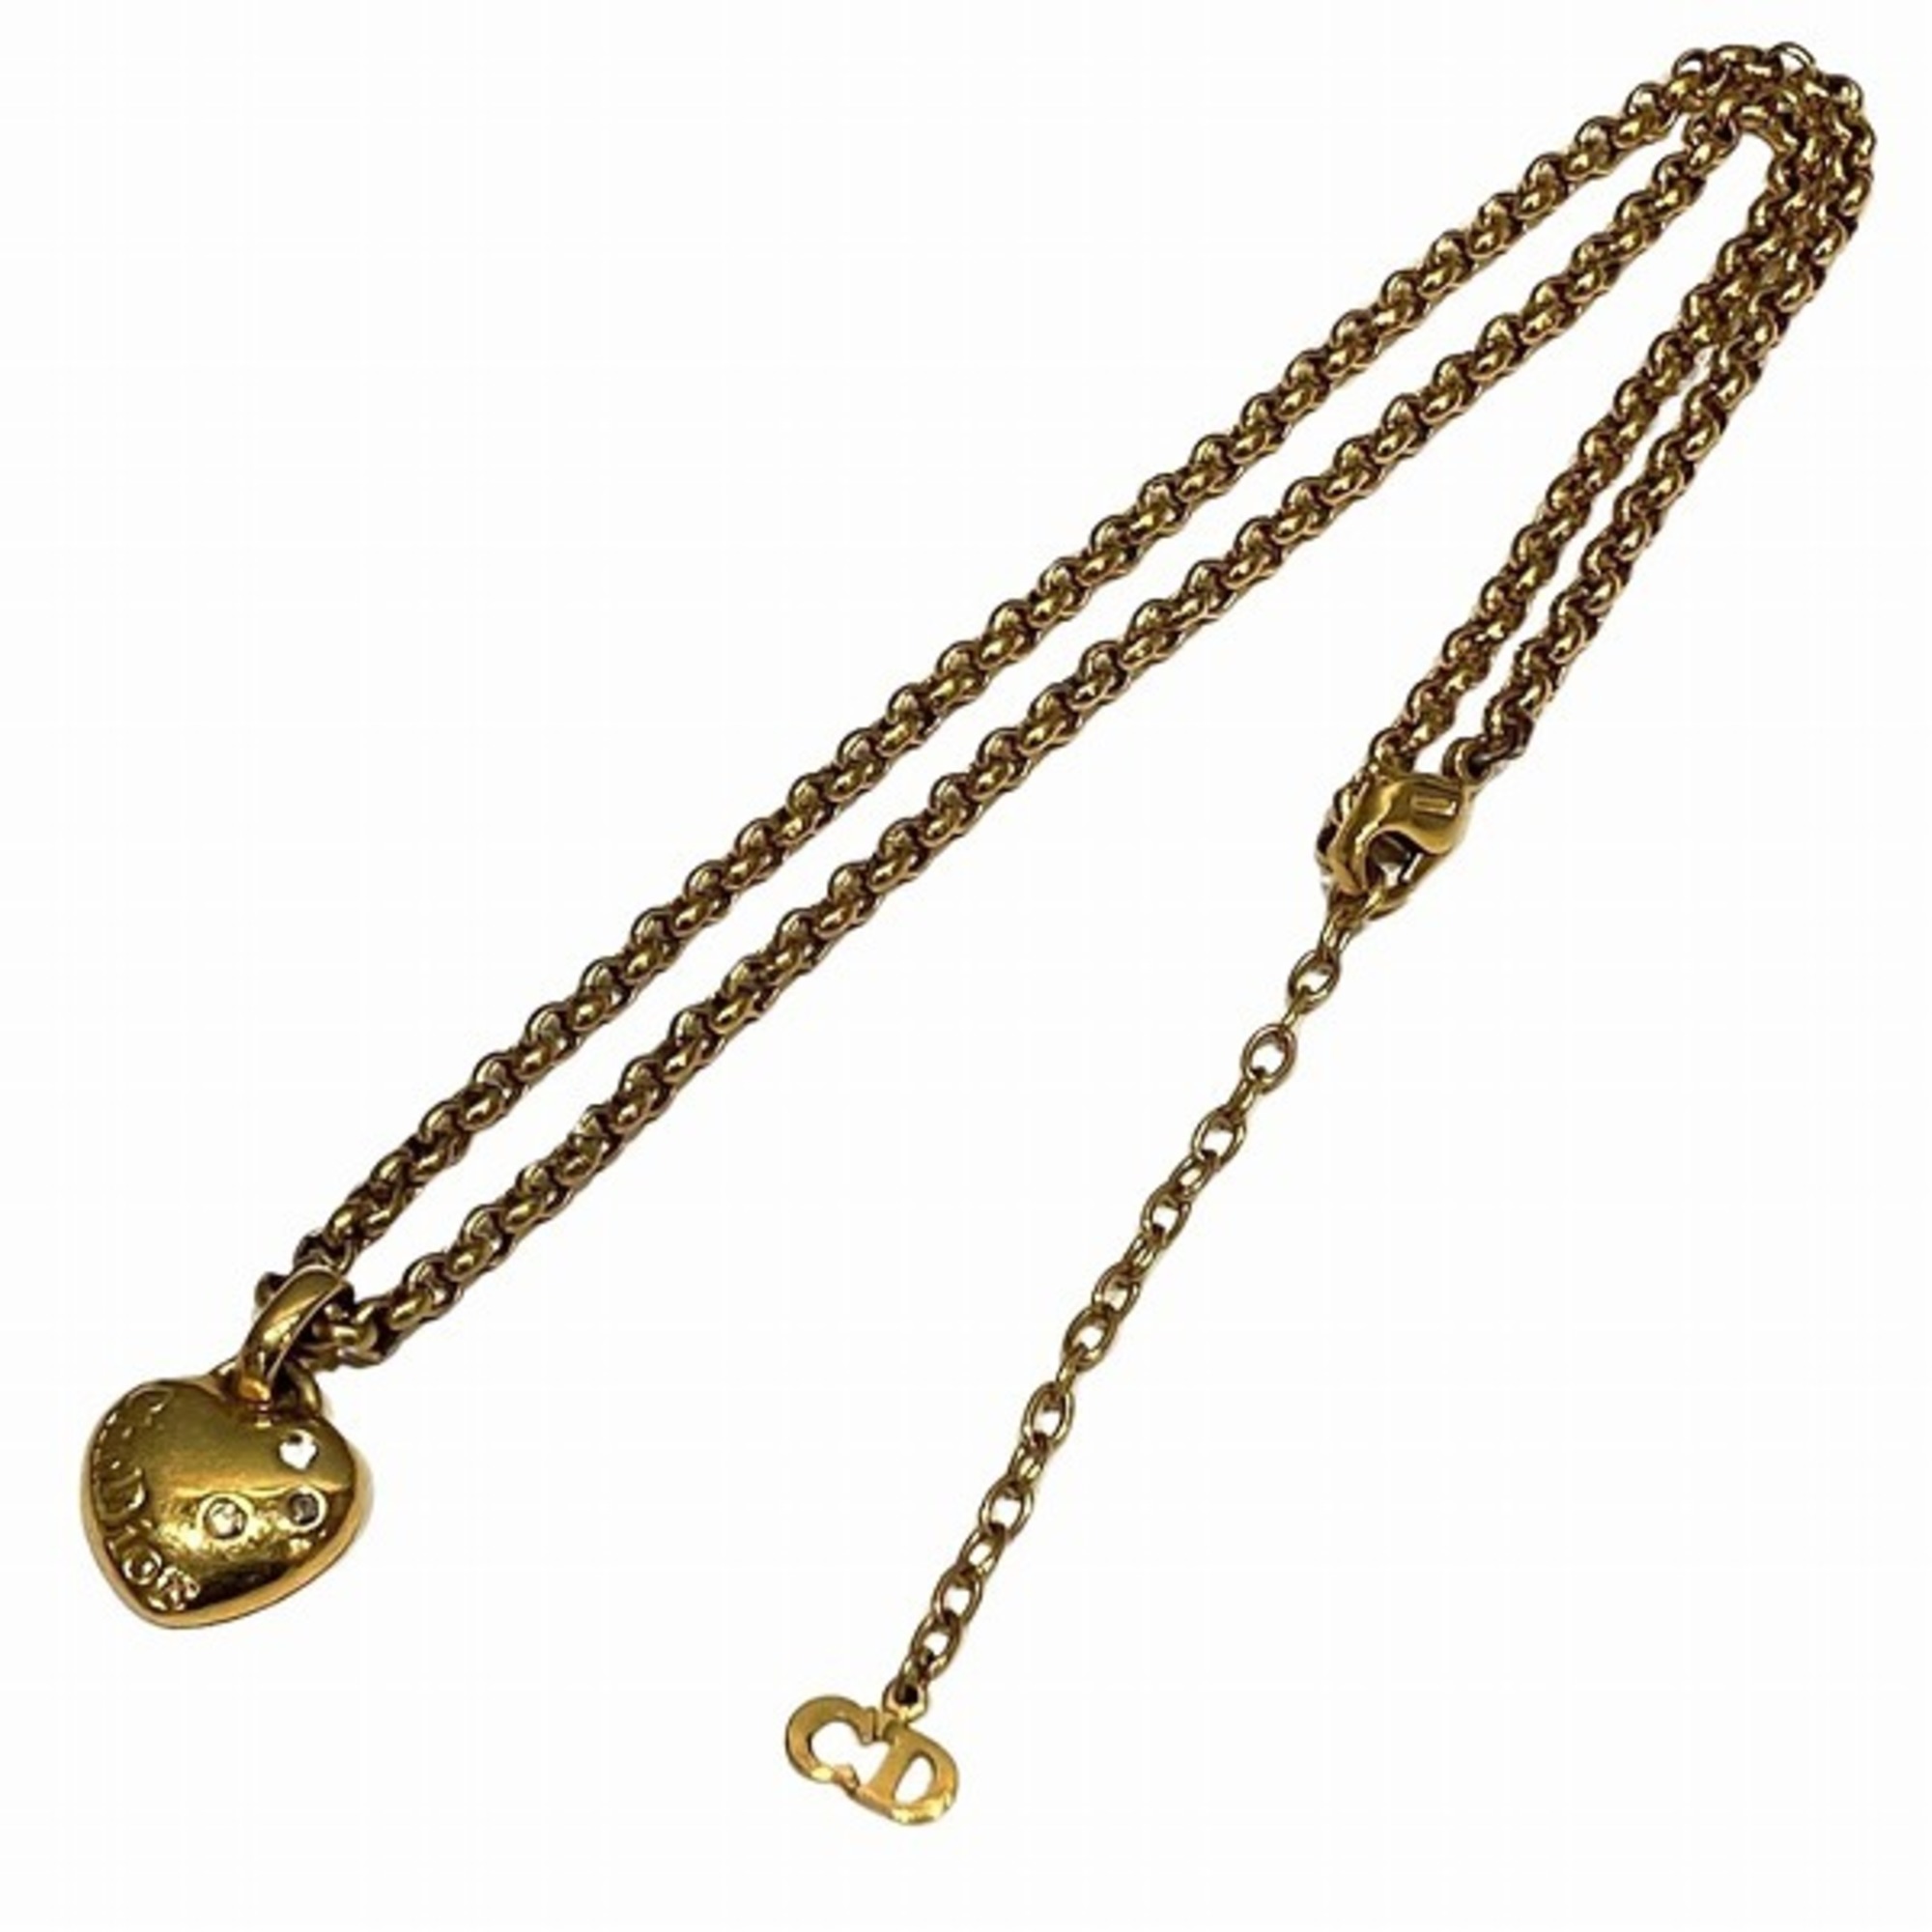 Christian Dior Dior heart stone logo gold brand accessory necklace ladies